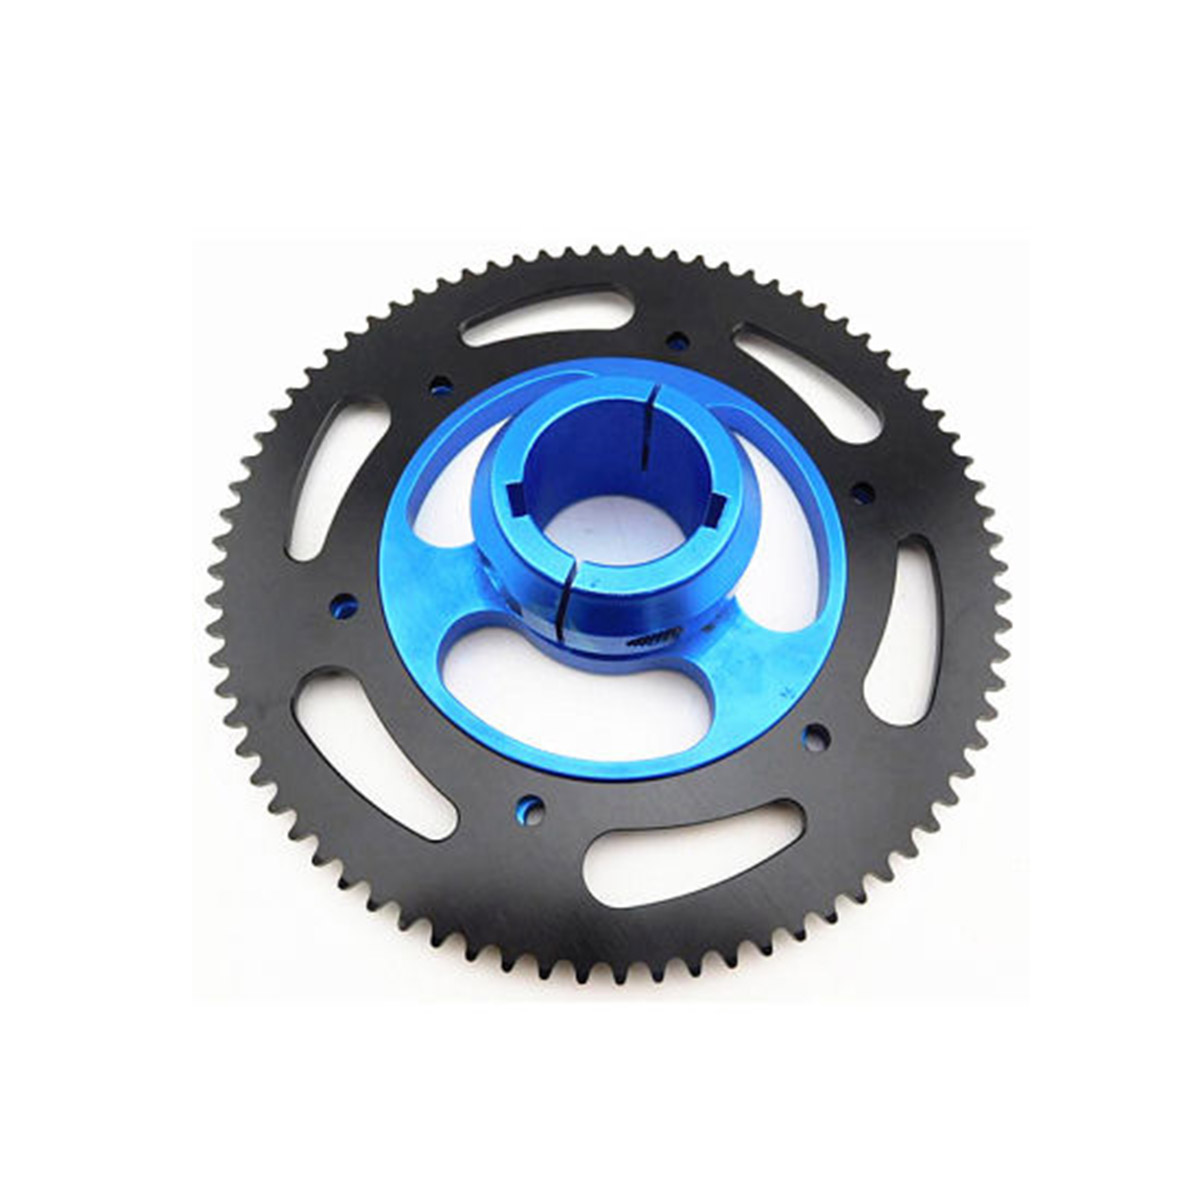 Wear resistant 219 sprockets for go kart industry, long lasting and nice feeling Featured Image